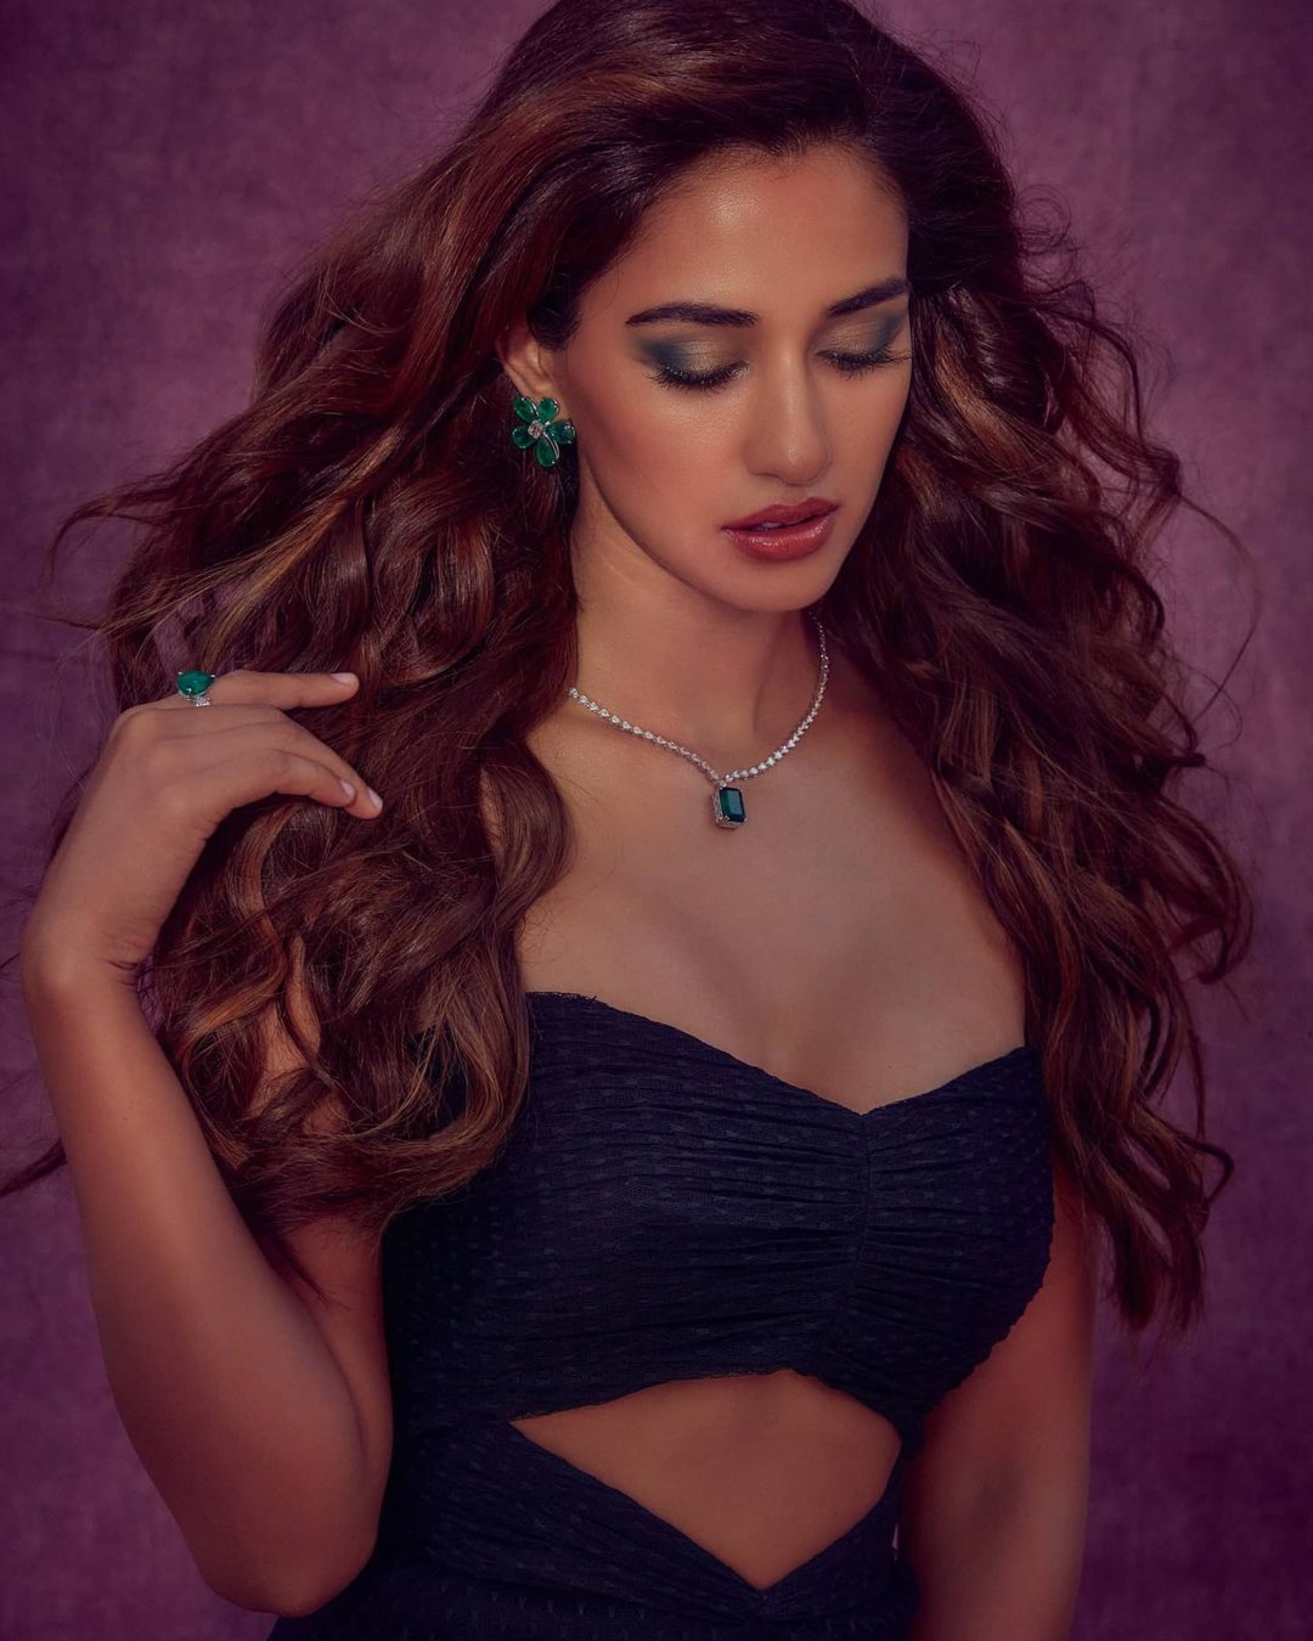  Disha Patani is looking surreal in this absolutely stunning pic from the photoshoot. (Credit: Instagram)